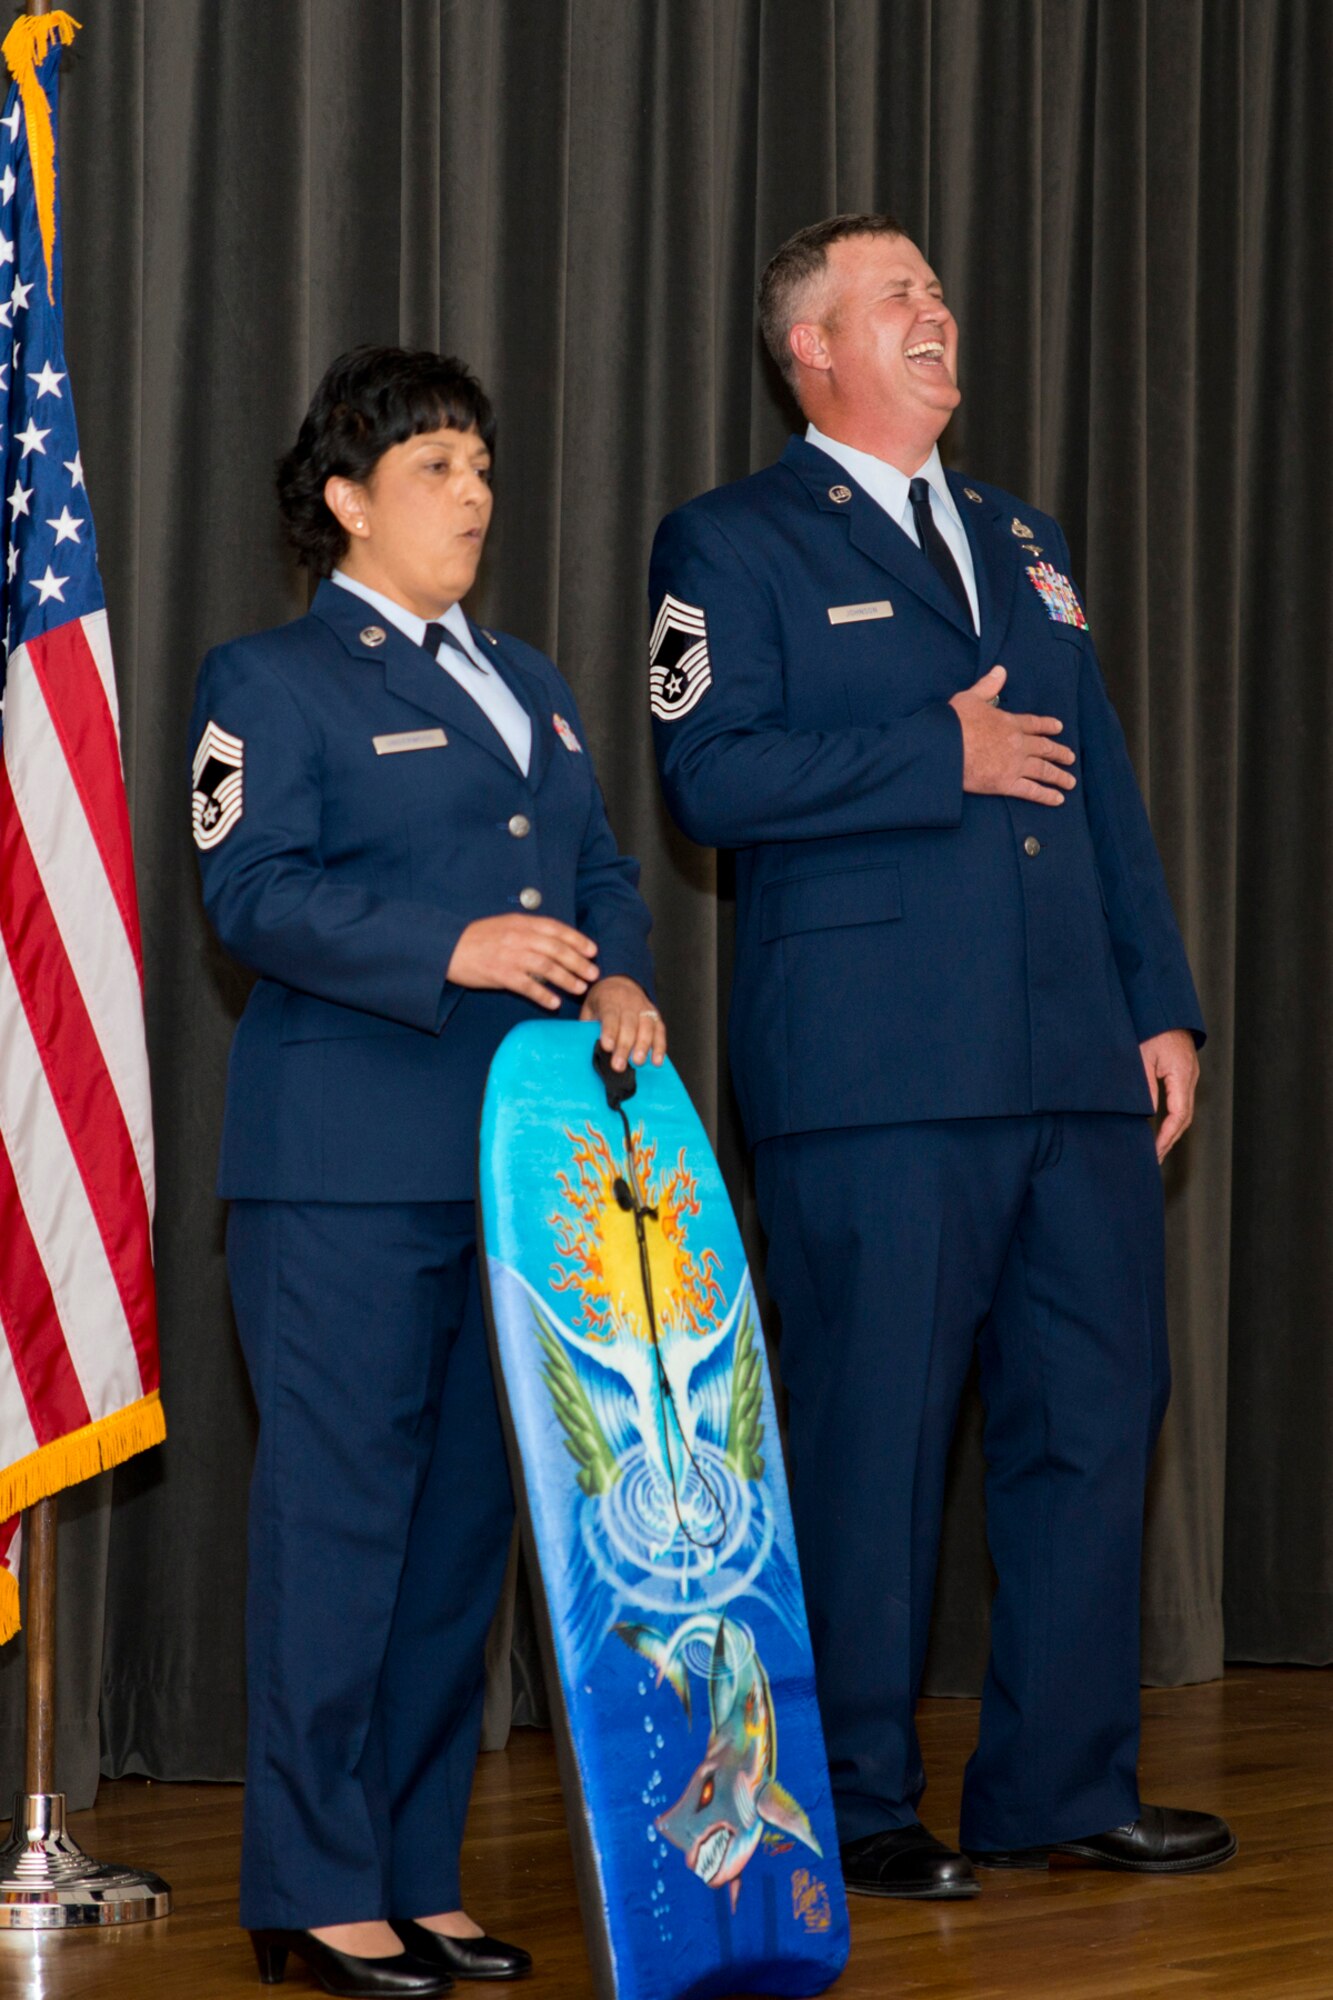 U.S. Air Force Reserve Chief Master Sgt. Cynthia Underwood, superintendent, 96th Aerial Port Squadron, reflects on the career of Retired Chief Master Sgt. Todd Johnson, during his retirement ceremony at Little Rock Air Force Base, Ark., May 14, 2016. Johnson retired after 28 years of faithful service to his country in a room filled with family, friends and co-workers. (U.S. Air Force photo by Master Sgt. Jeff Walston/Released)     